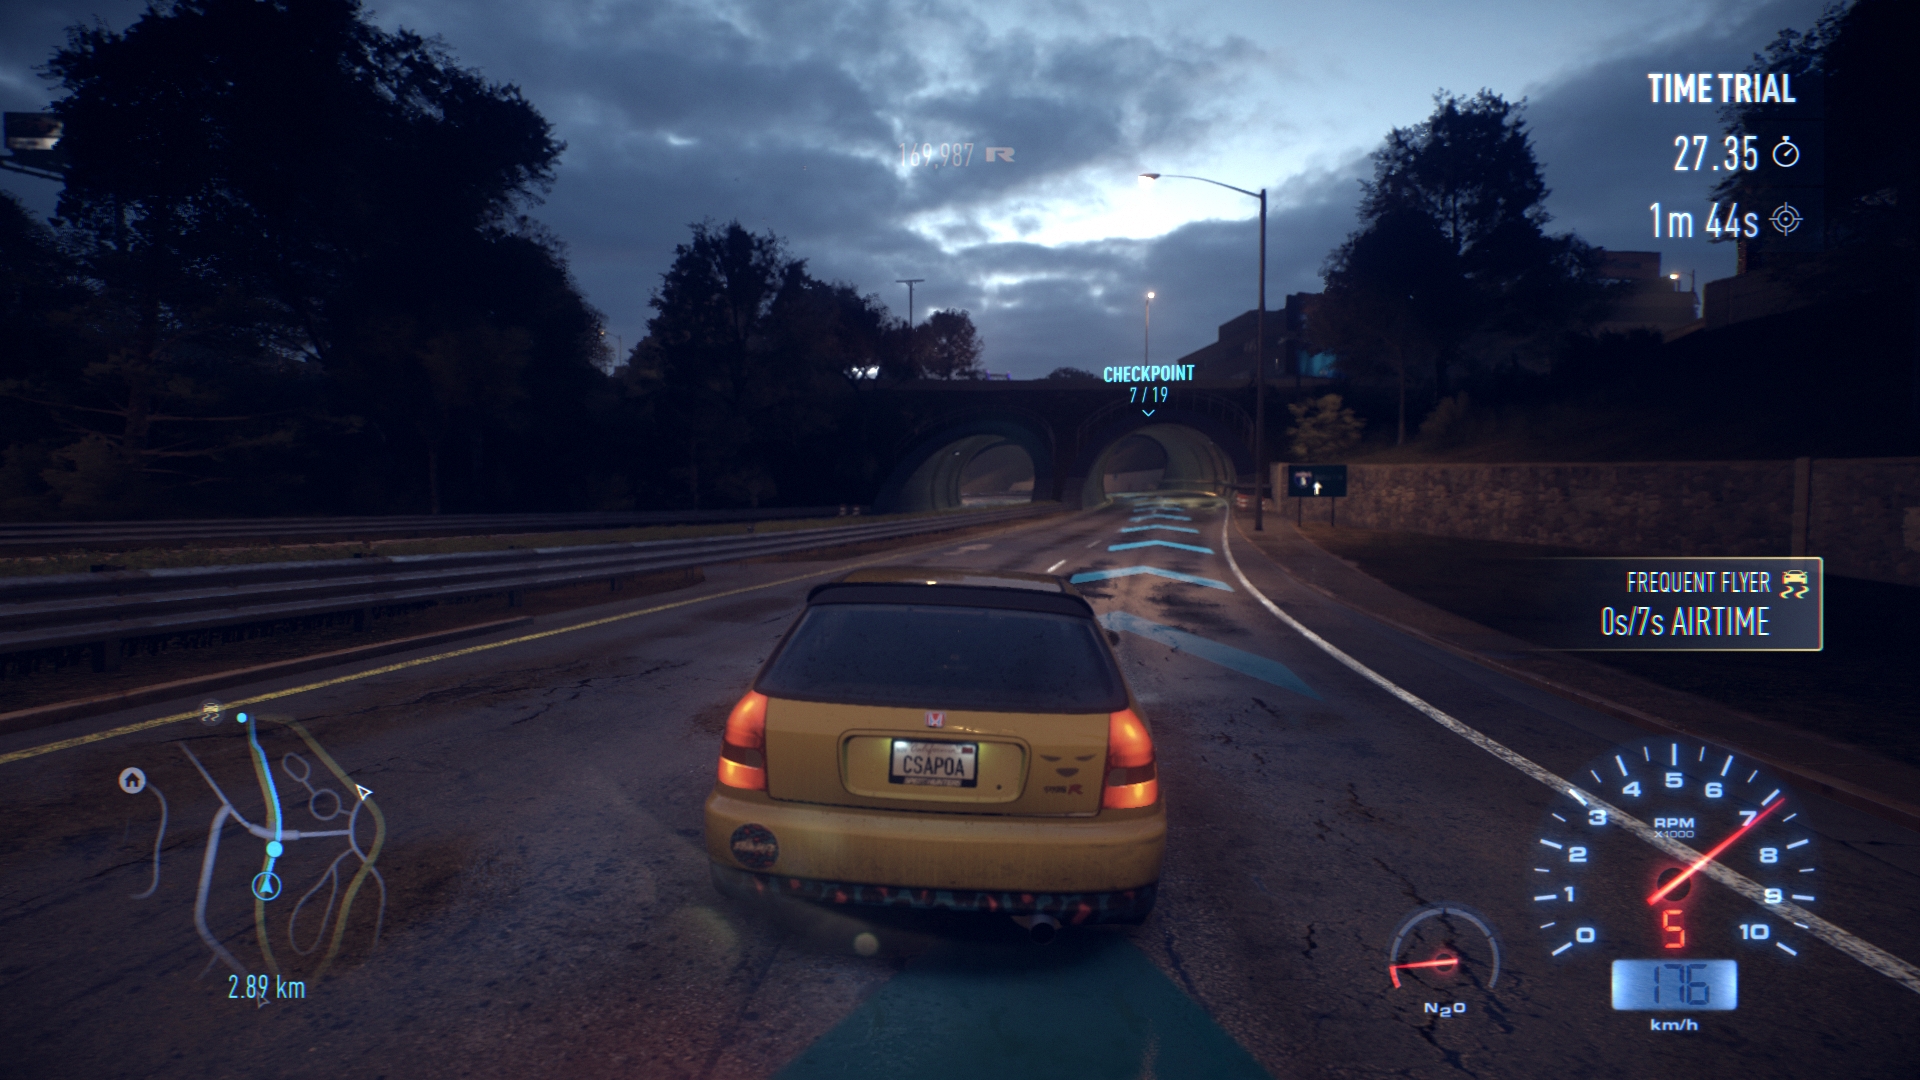 nfs 2015 free trial